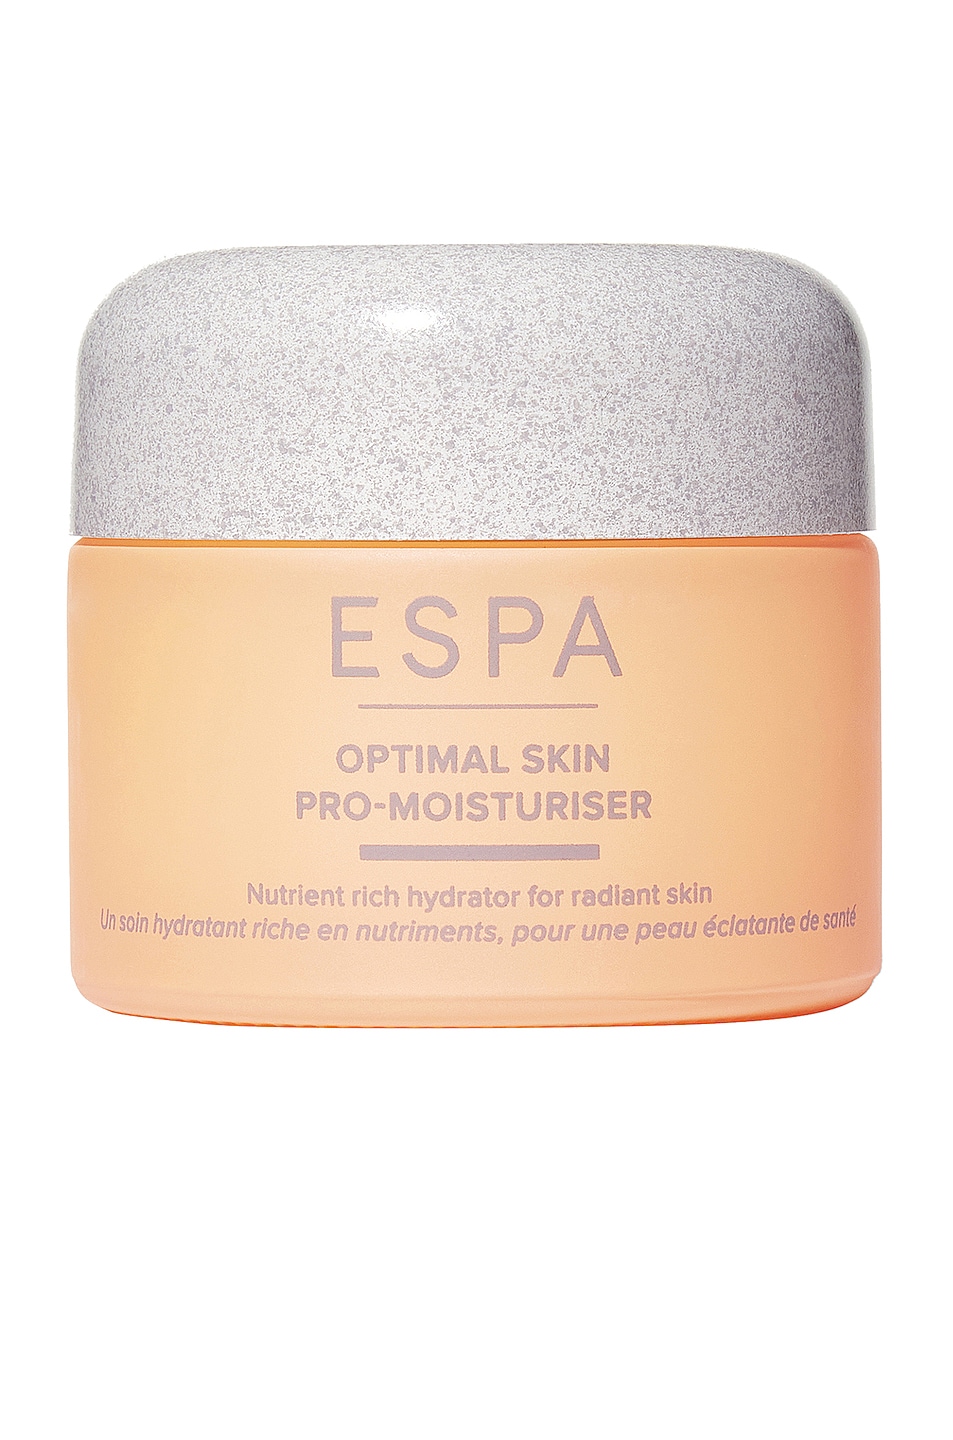 Active Nutrients Pro Moisturizer in Beauty: NA